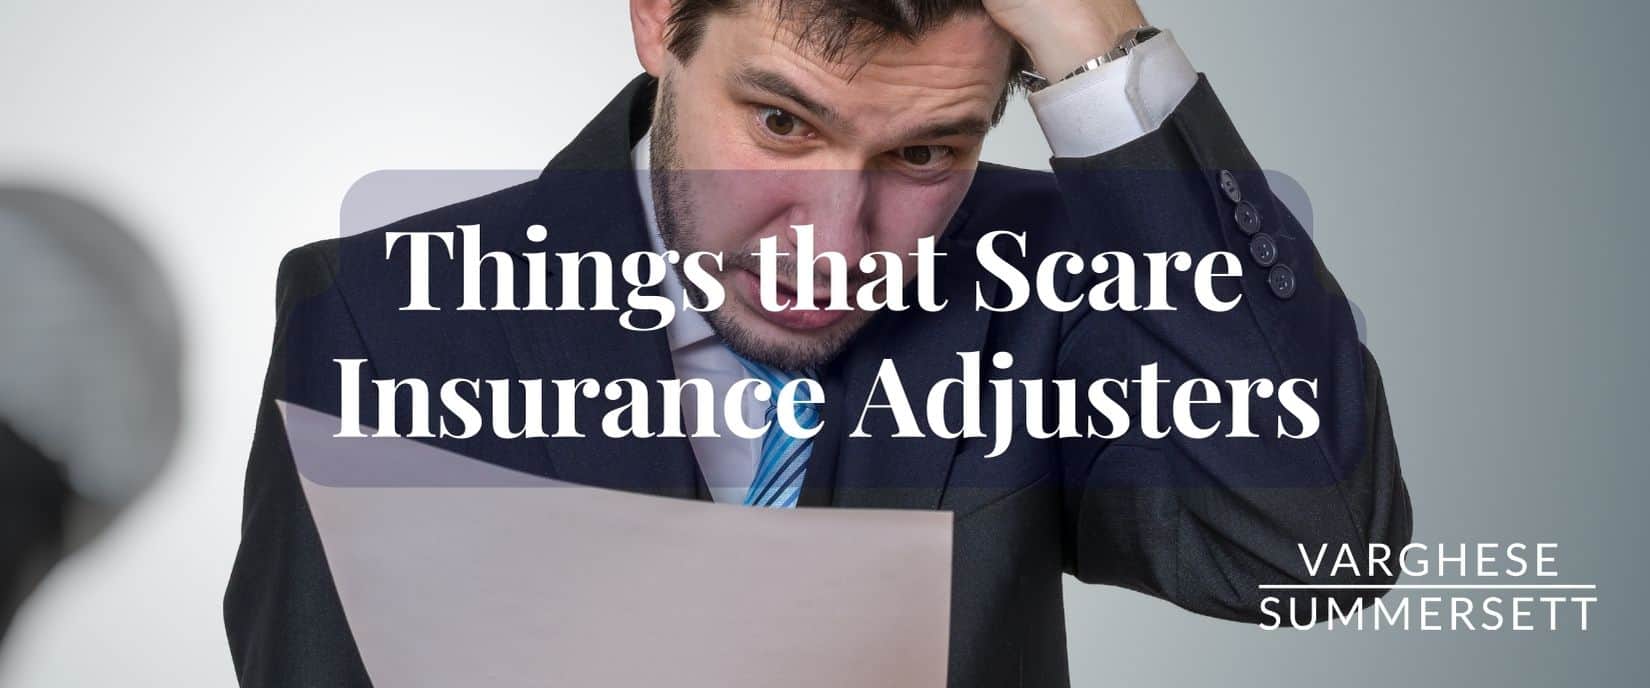 Things that Scare Insurance Adjusters